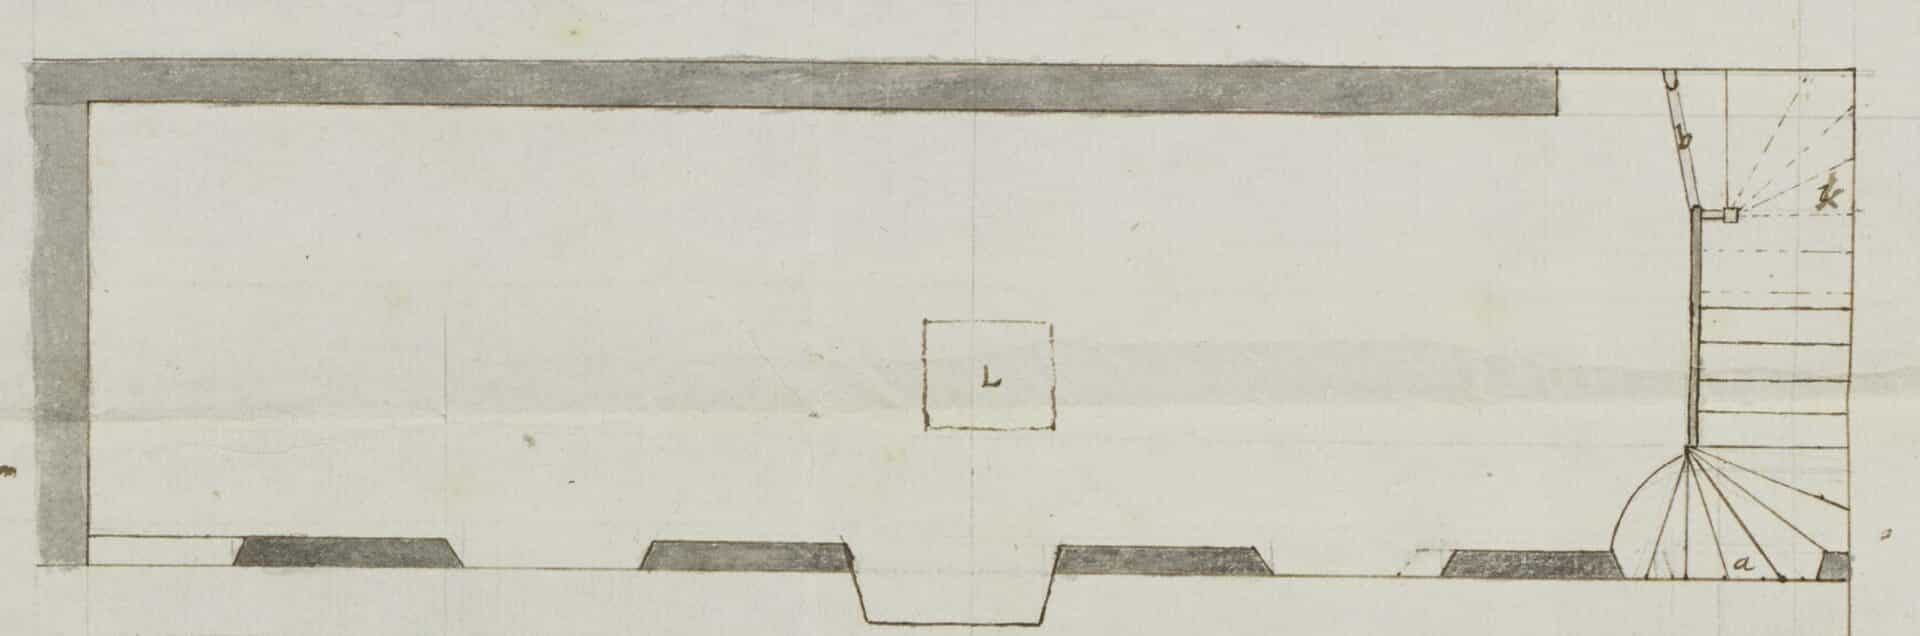 Plan of Old Library main floor and stairs showing width in 1695